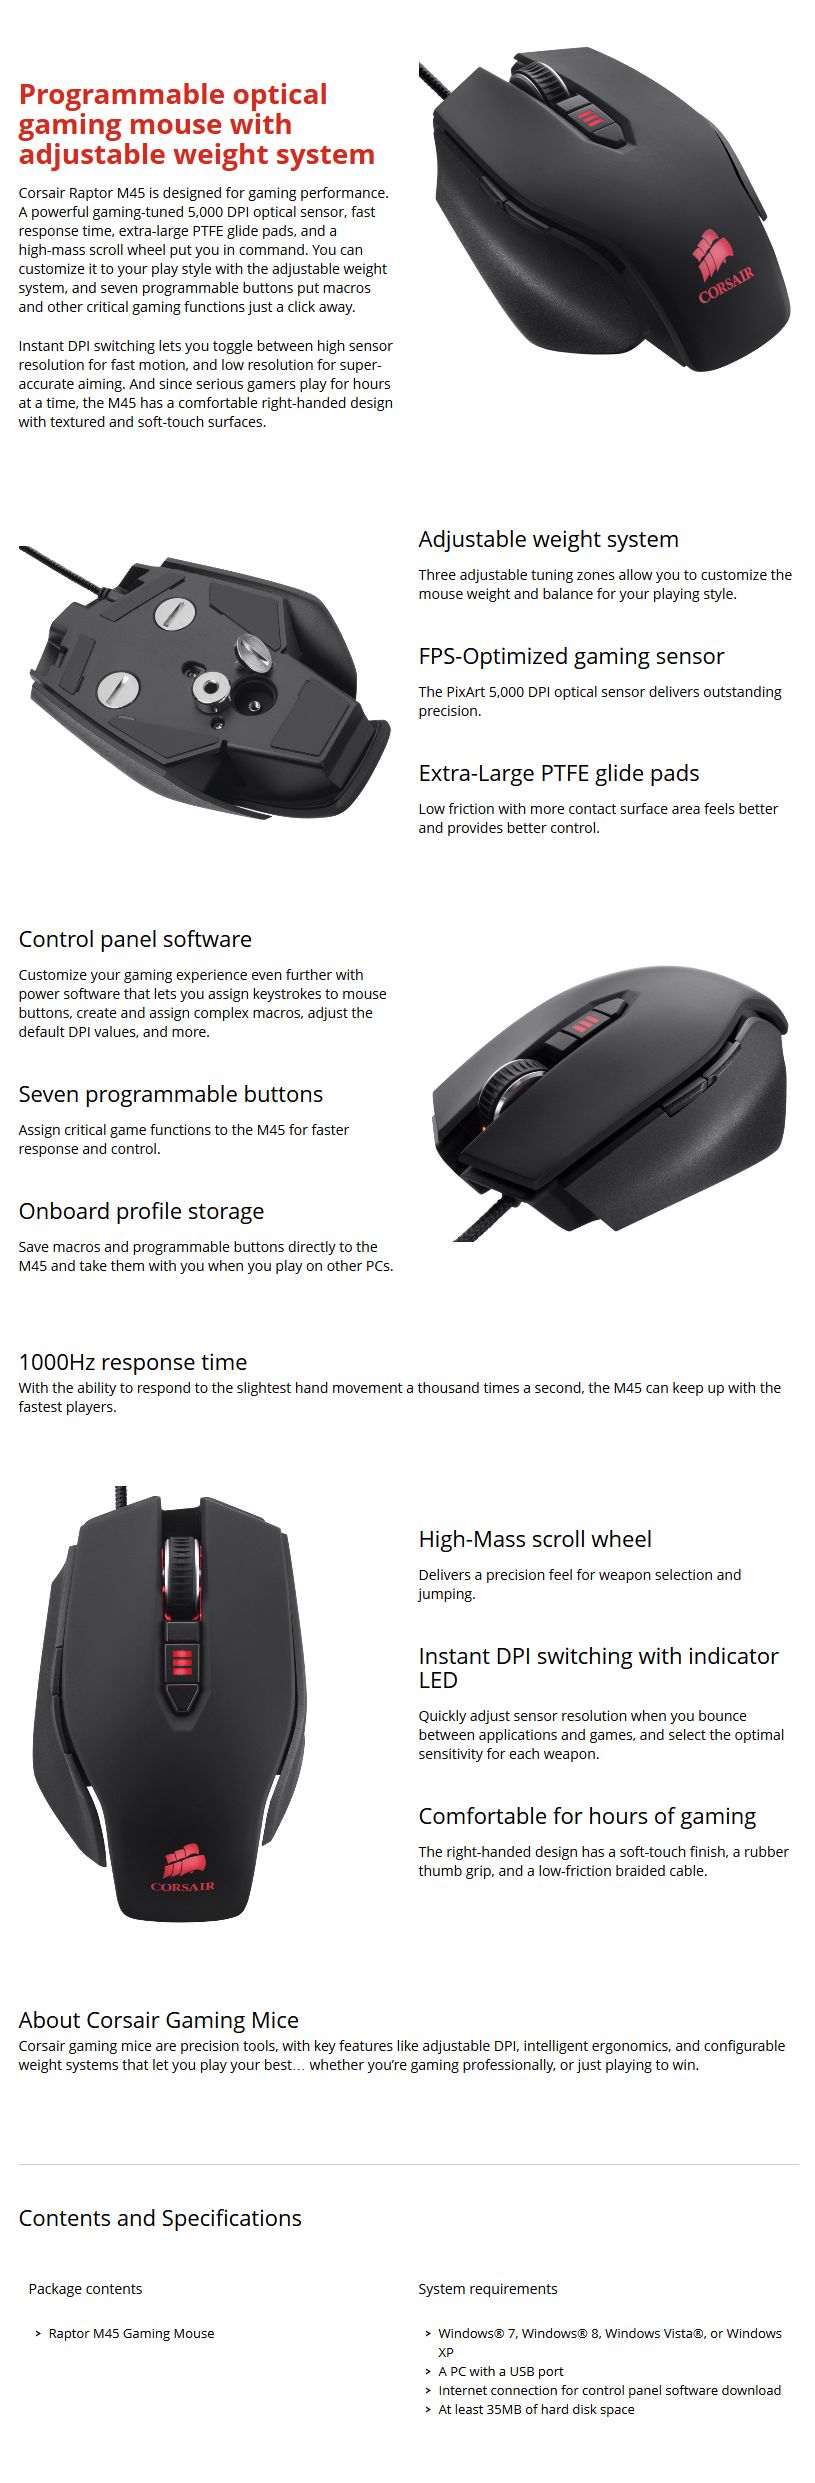 mr button in corsair m45 mouse software